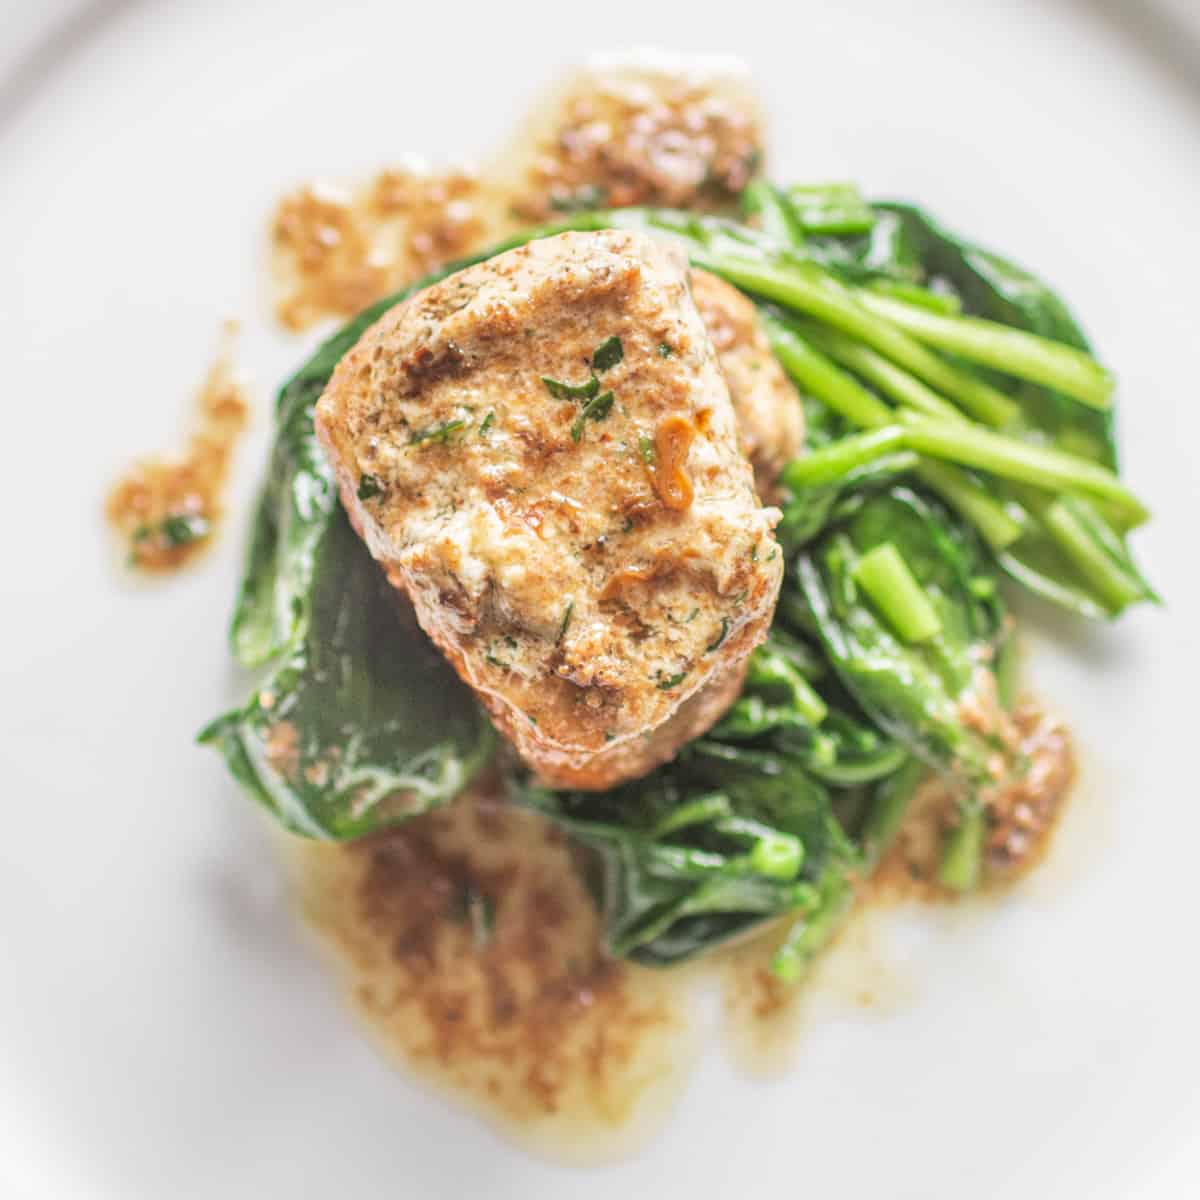 a piece of meat with mushroom butter melting on it over spinach